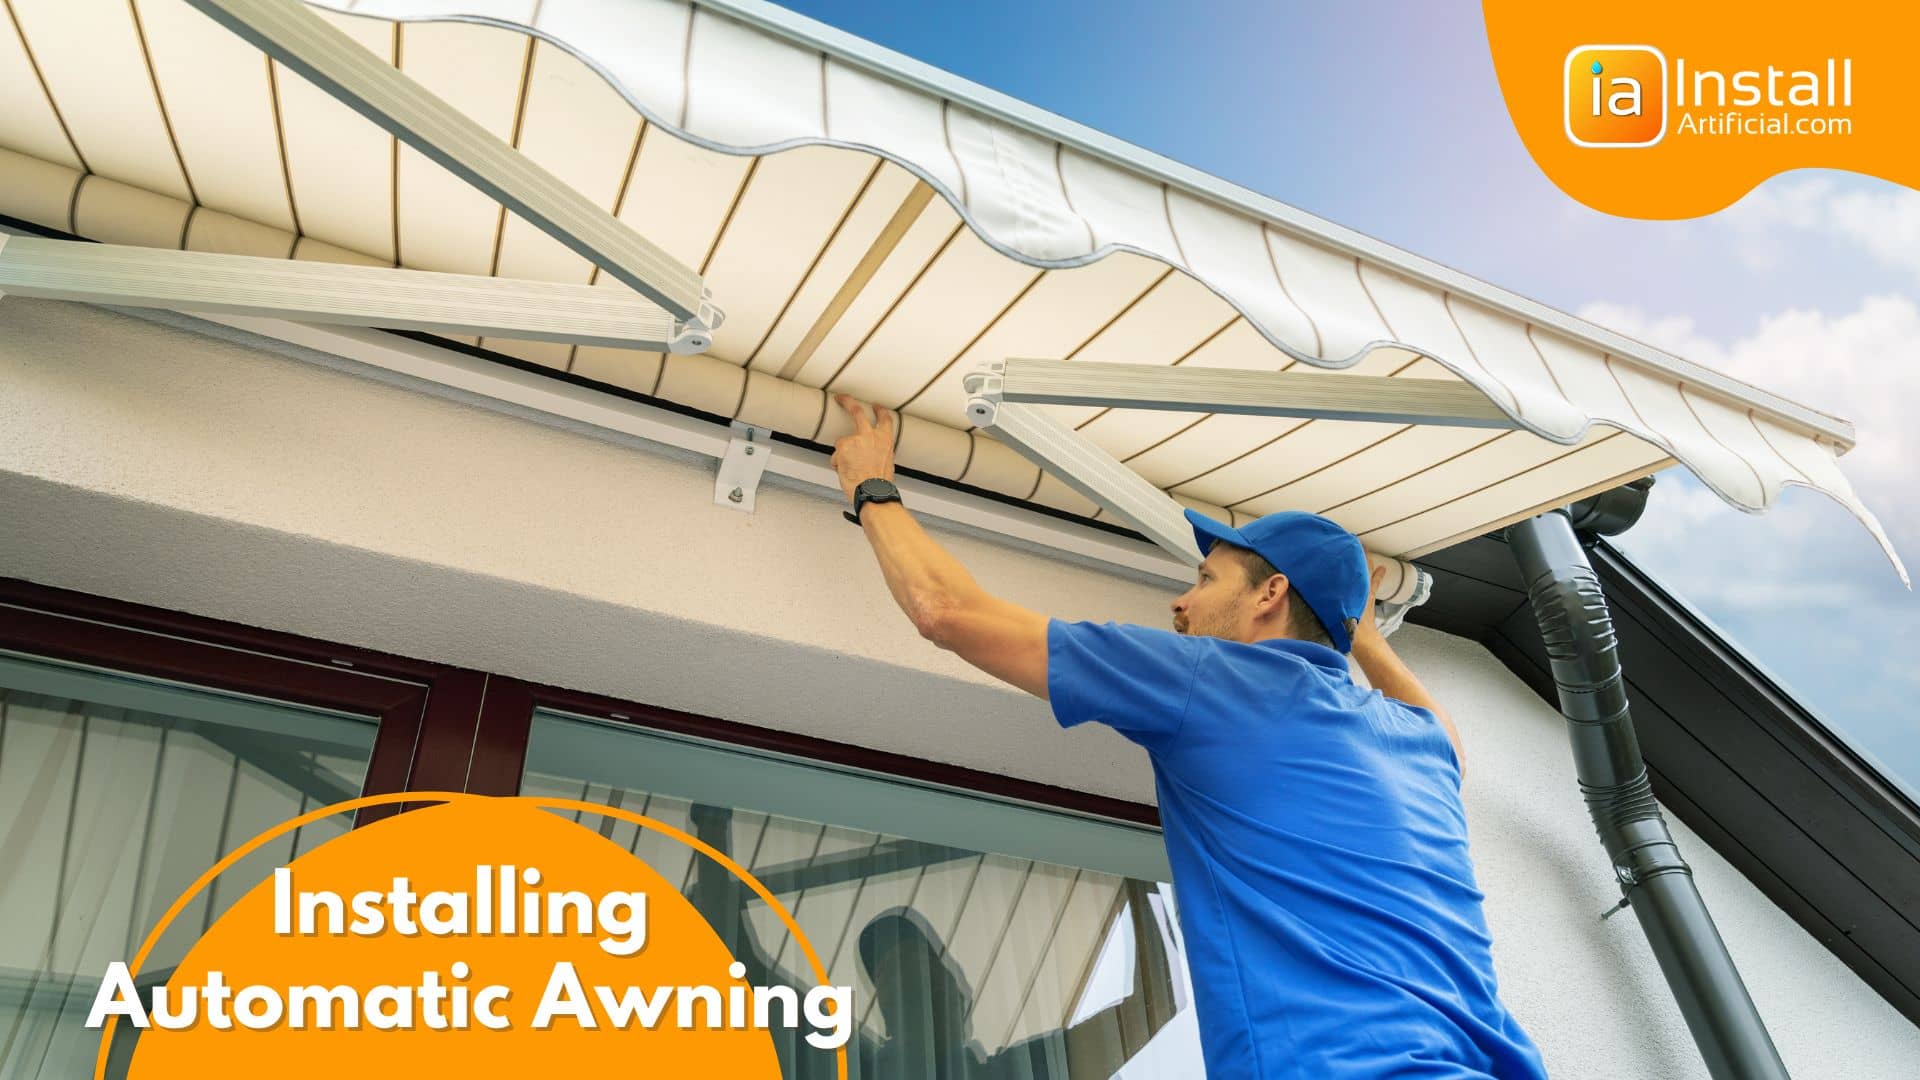 Installing Automatic Awning